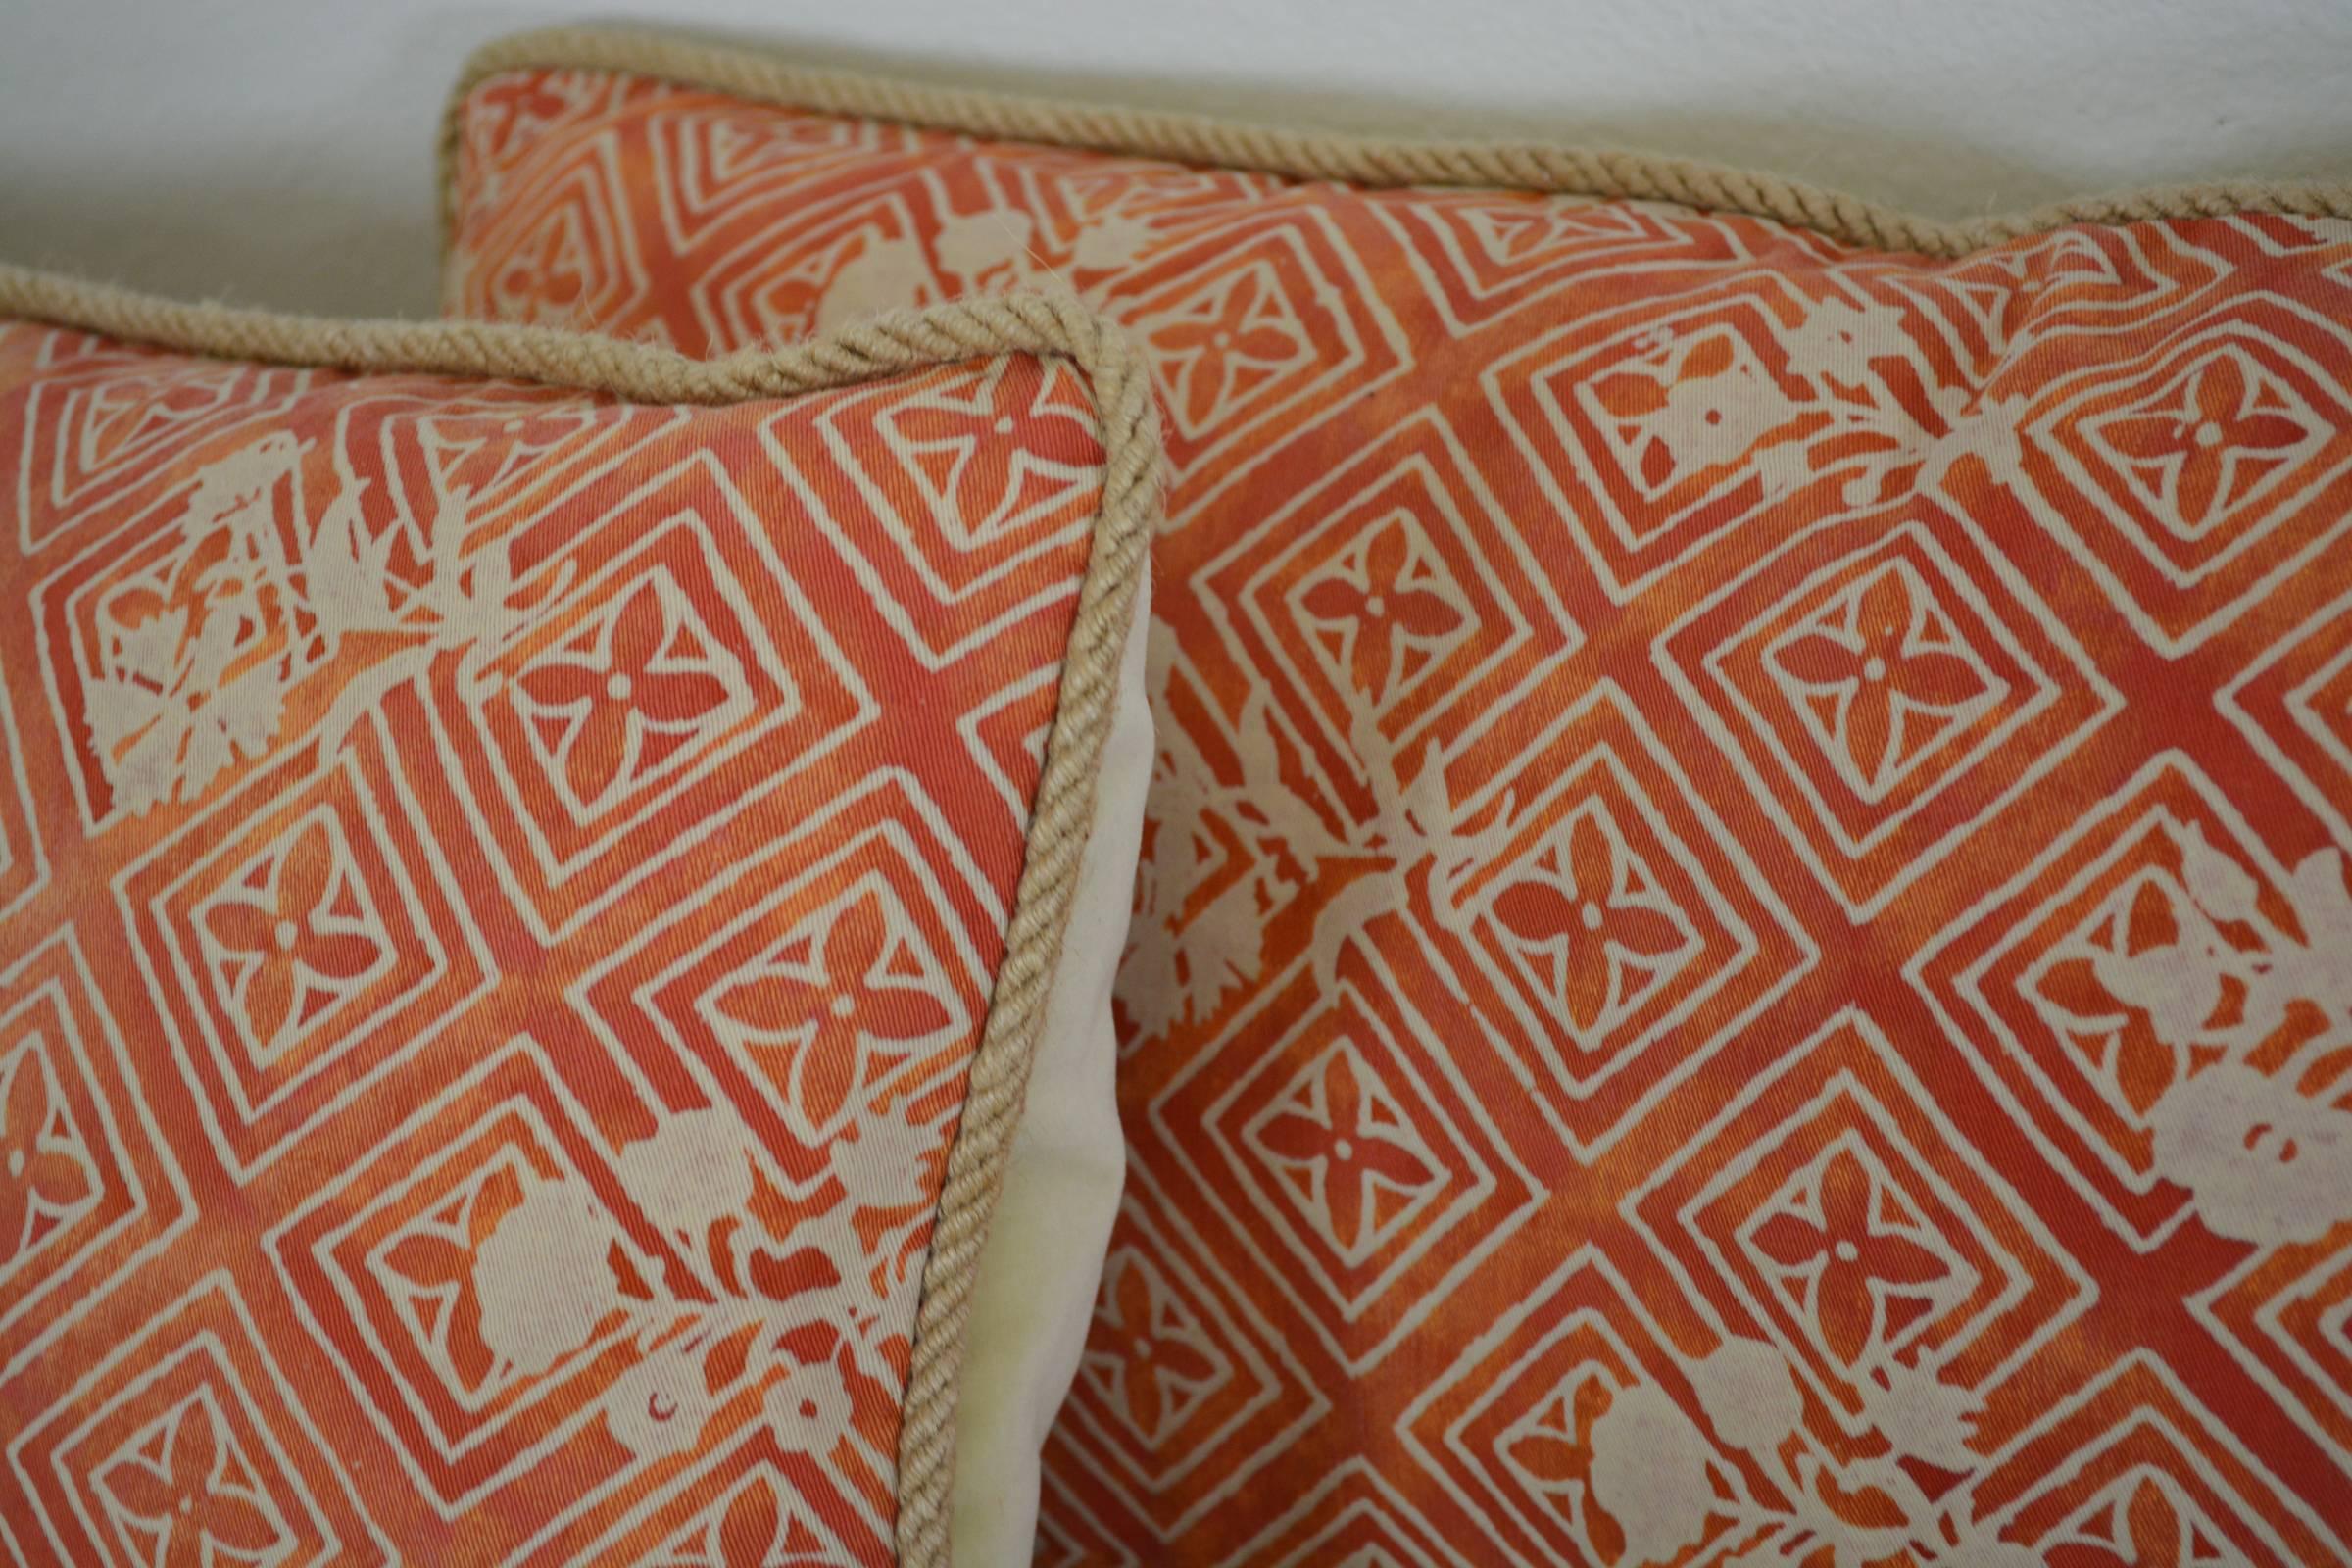 Italian Pair of Vintage Fortuny Fabric Pillows